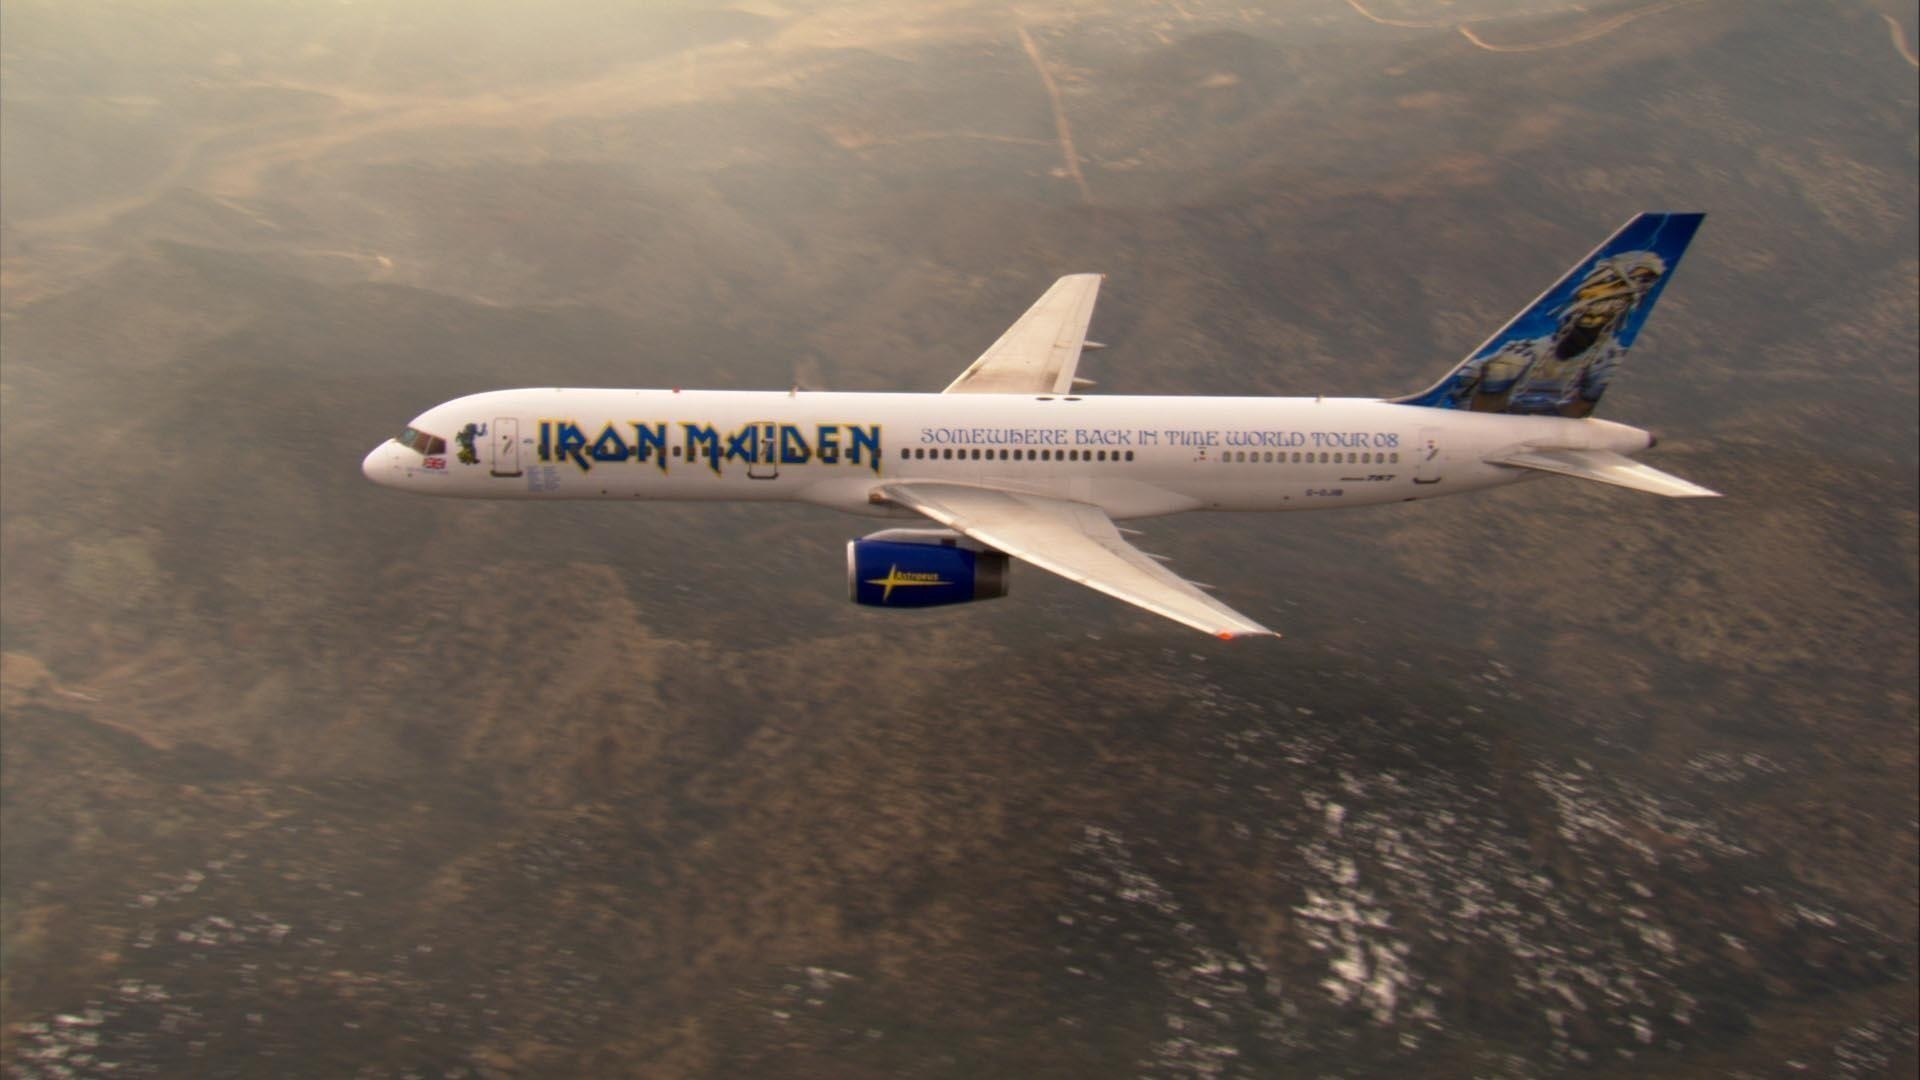 1920x1080 Wallpaper Iron maiden, Airplane, Name, Graphics, Sky HD, Picture, Image